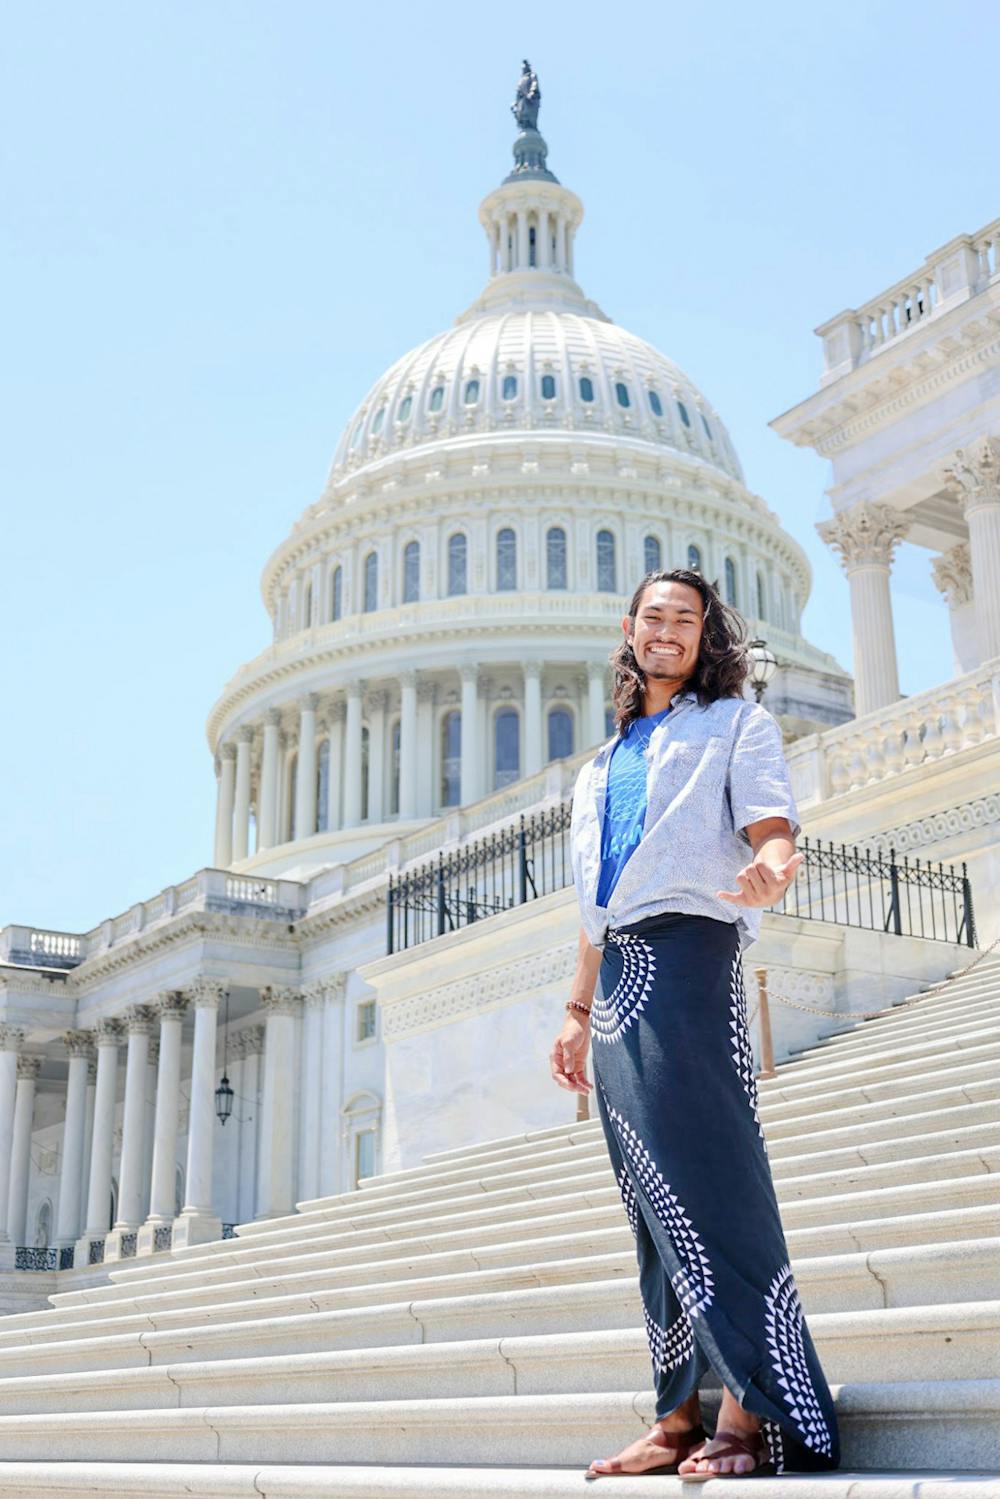 <p>As a former Natives at Brown coordinator and current Native American Heritage Series programmer, Kalikoonāmaukūpuna Kalāhiki ’24 focused their on-campus advocacy efforts over the past year on rebuilding the sense of community that was lost during COVID-19 for Native and Indigenous students.</p><p>Courtesy of ﻿Kalikoonāmaukūpuna Kalāhiki.</p>